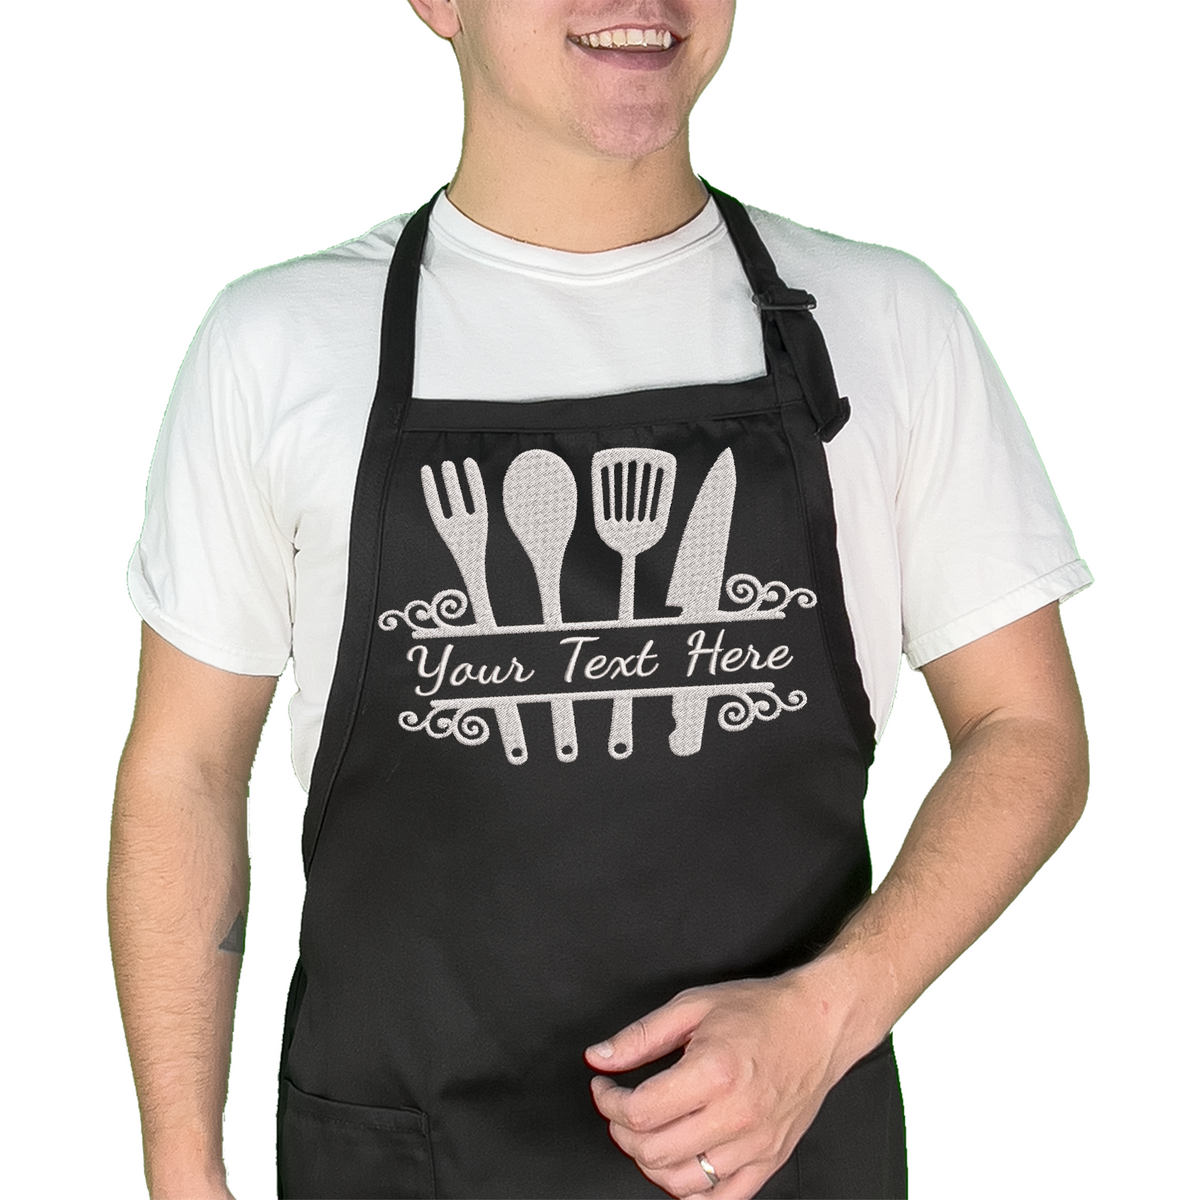 Personalized Chef Apron Embroidered Kitchen Design Aprons for Women an —  Place4Print - Best Place Printing & Embroidery, Aprons, Caps